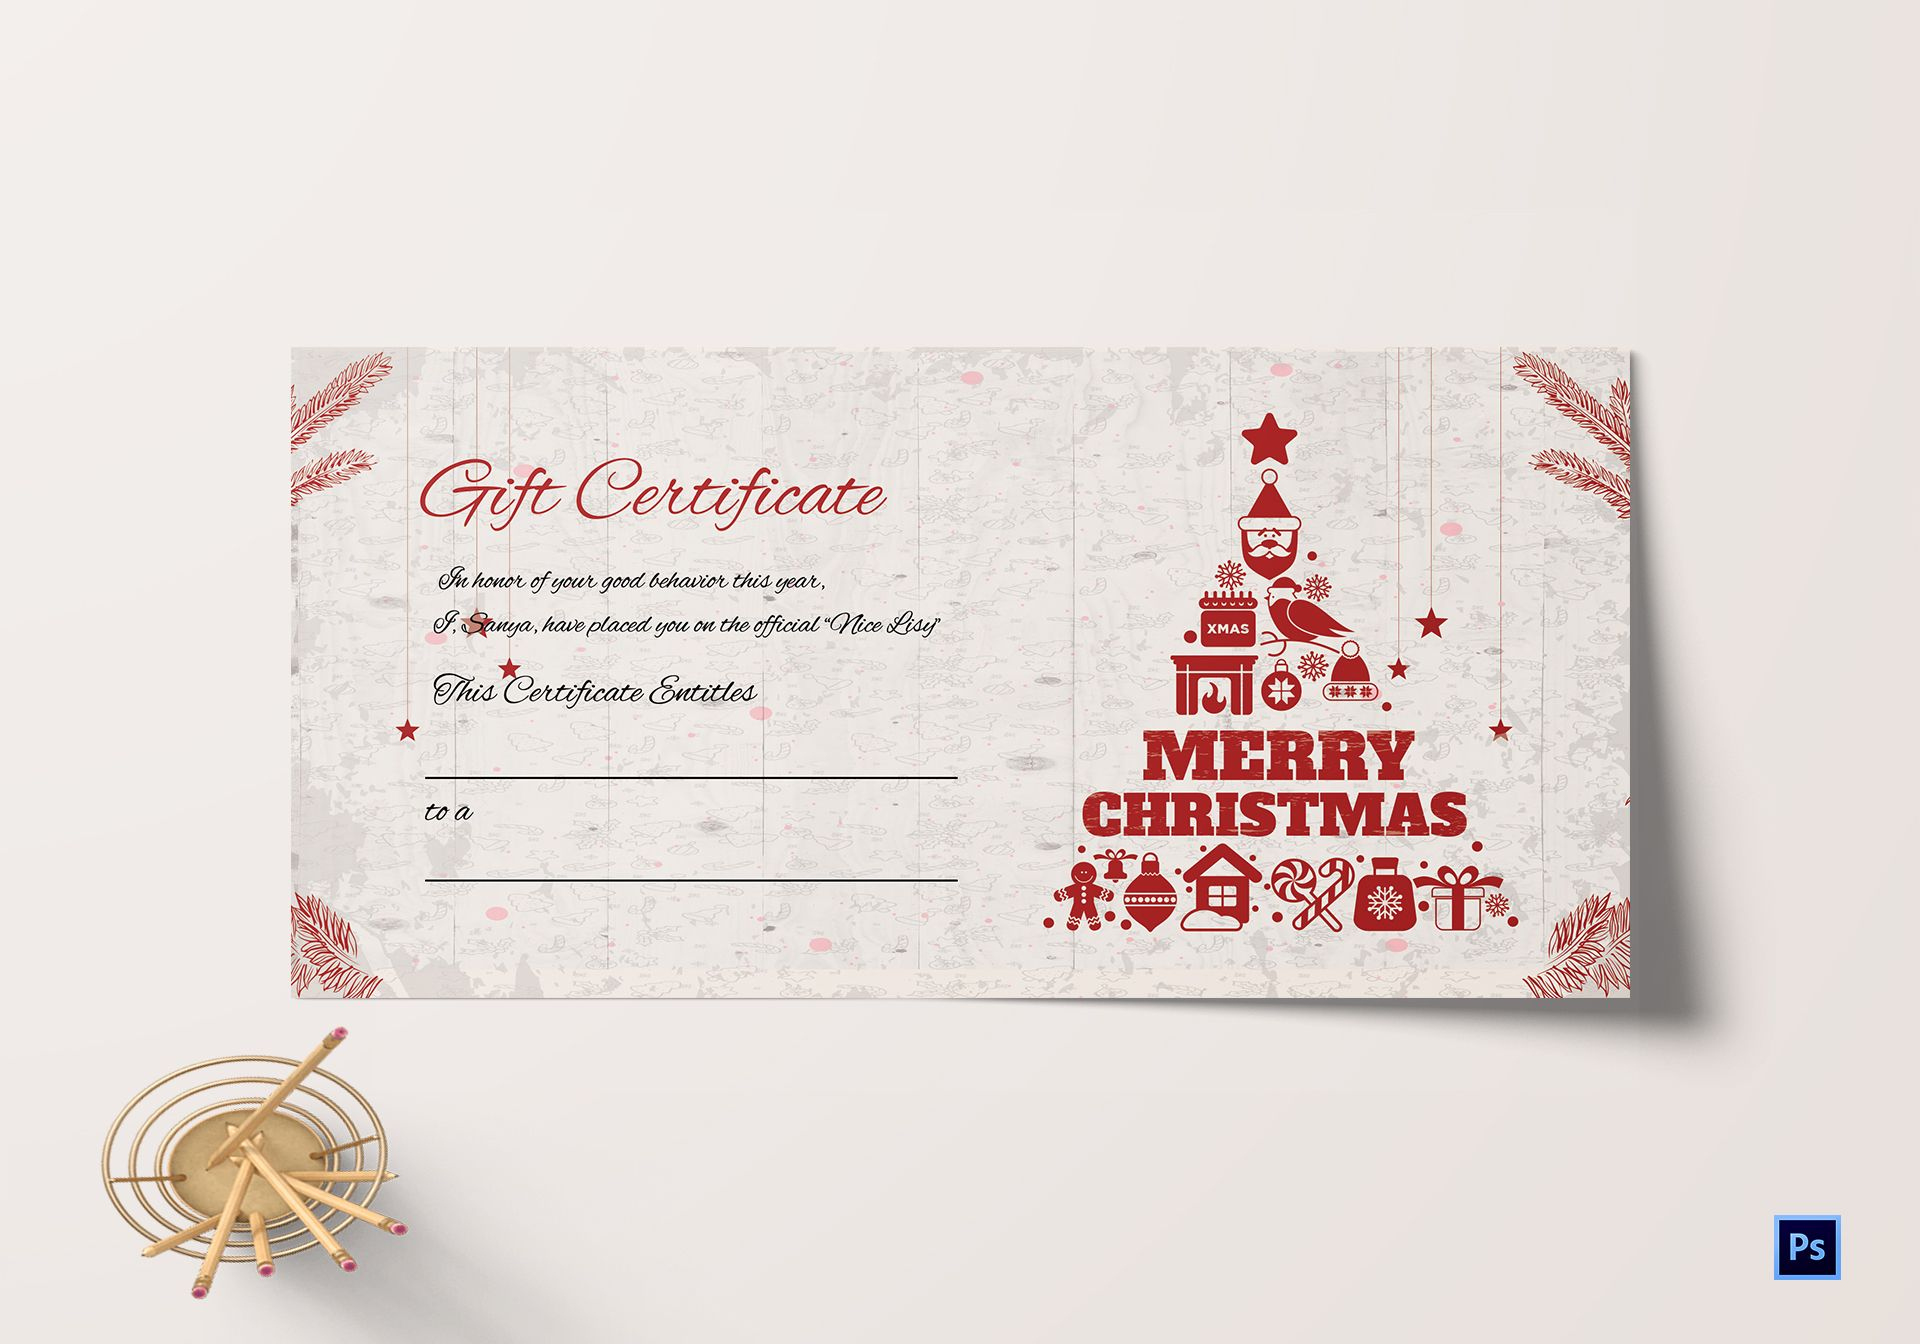 Merry Christmas Gift Certificate Template In Adobe Photoshop intended for Christmas Gift Certificate Template